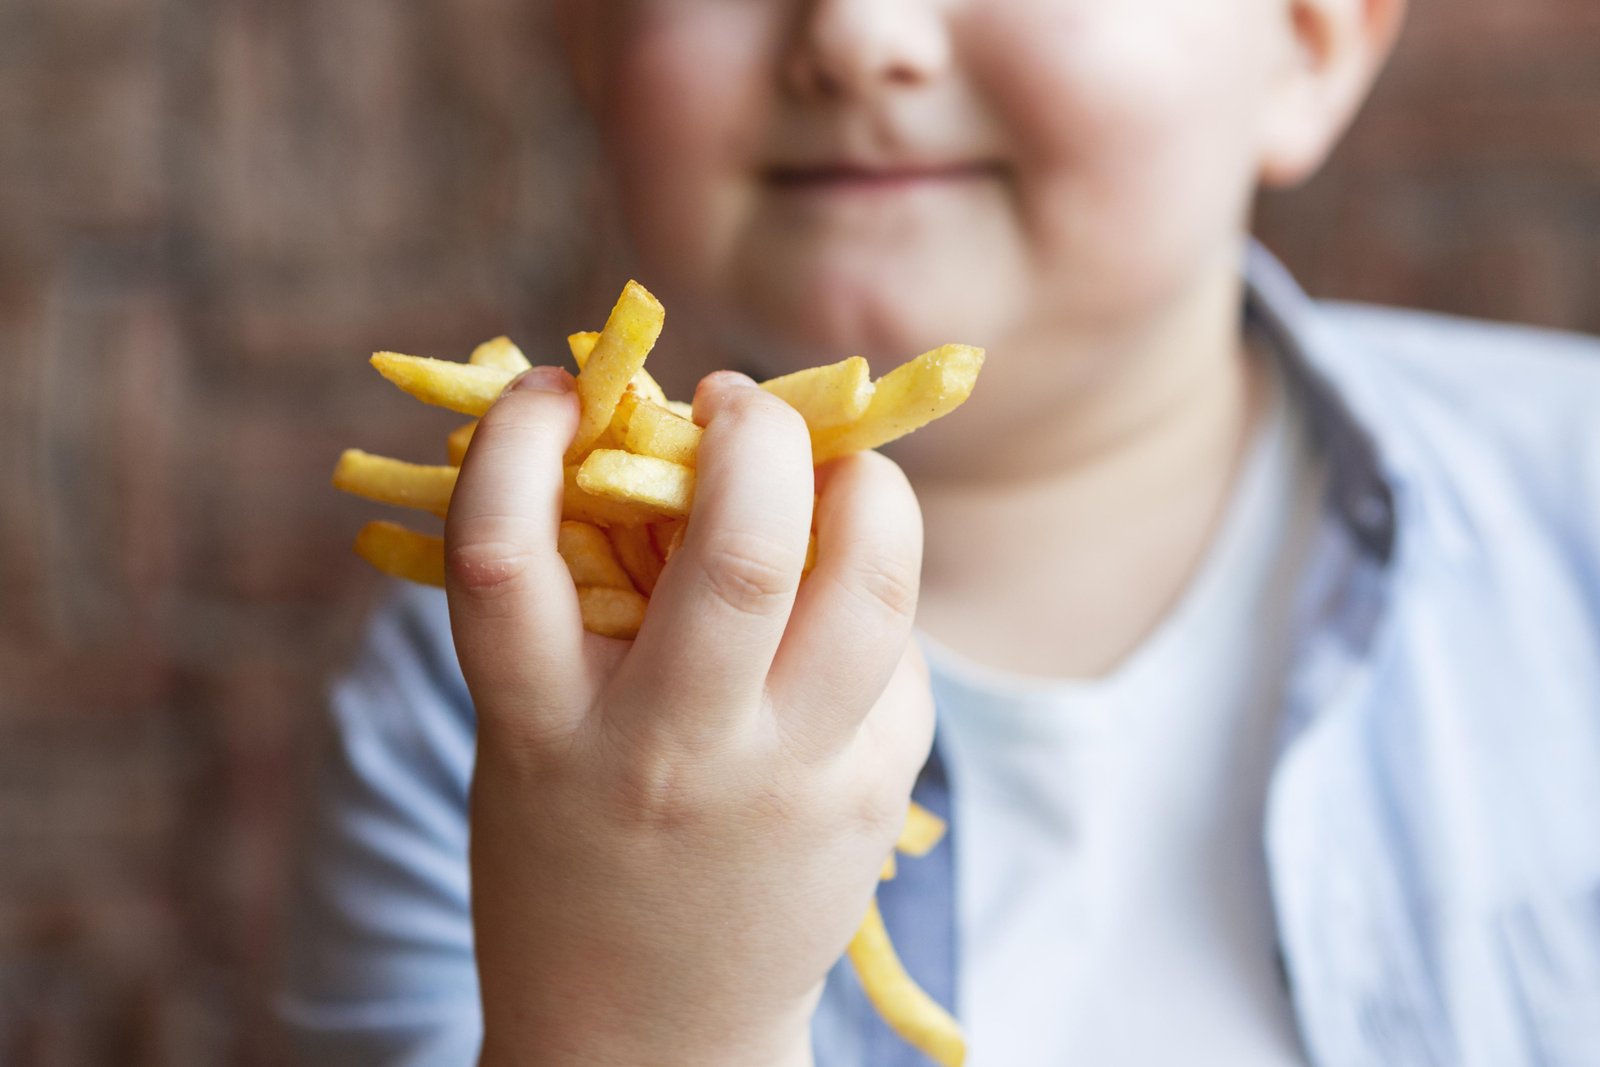 Here’s How To Promote Healthy Lifestyle In Overweight Children